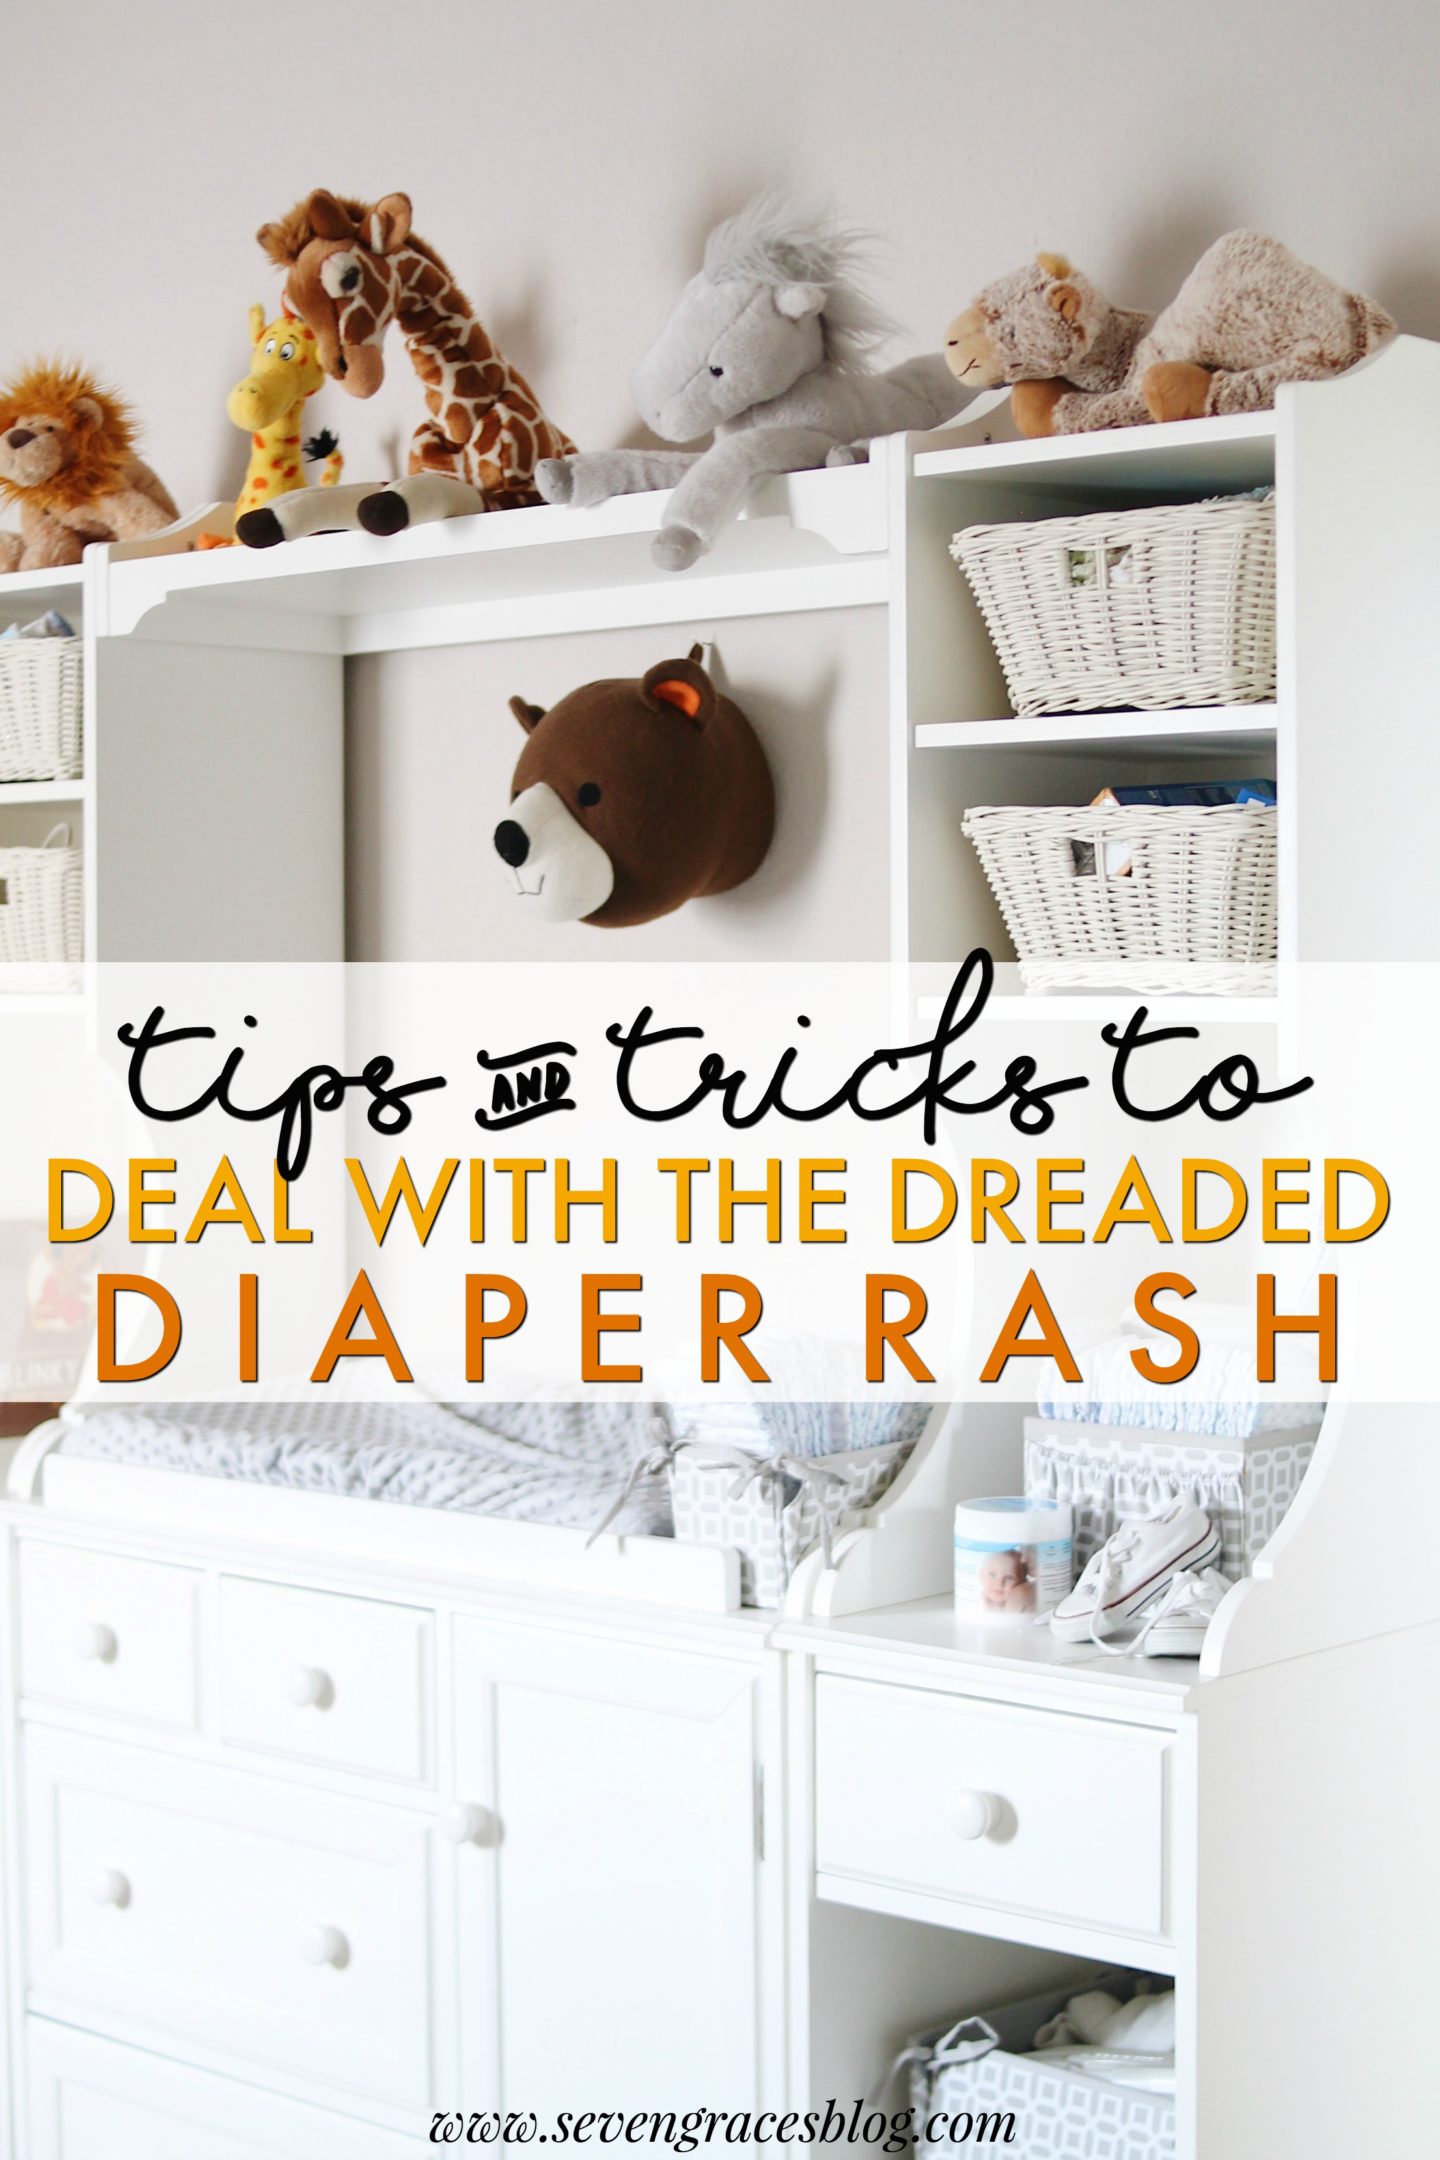 Tips & tricks to deal with the dreaded diaper rash! The best diaper rash ointment on the market. #babyproducts #bestbabyproducts